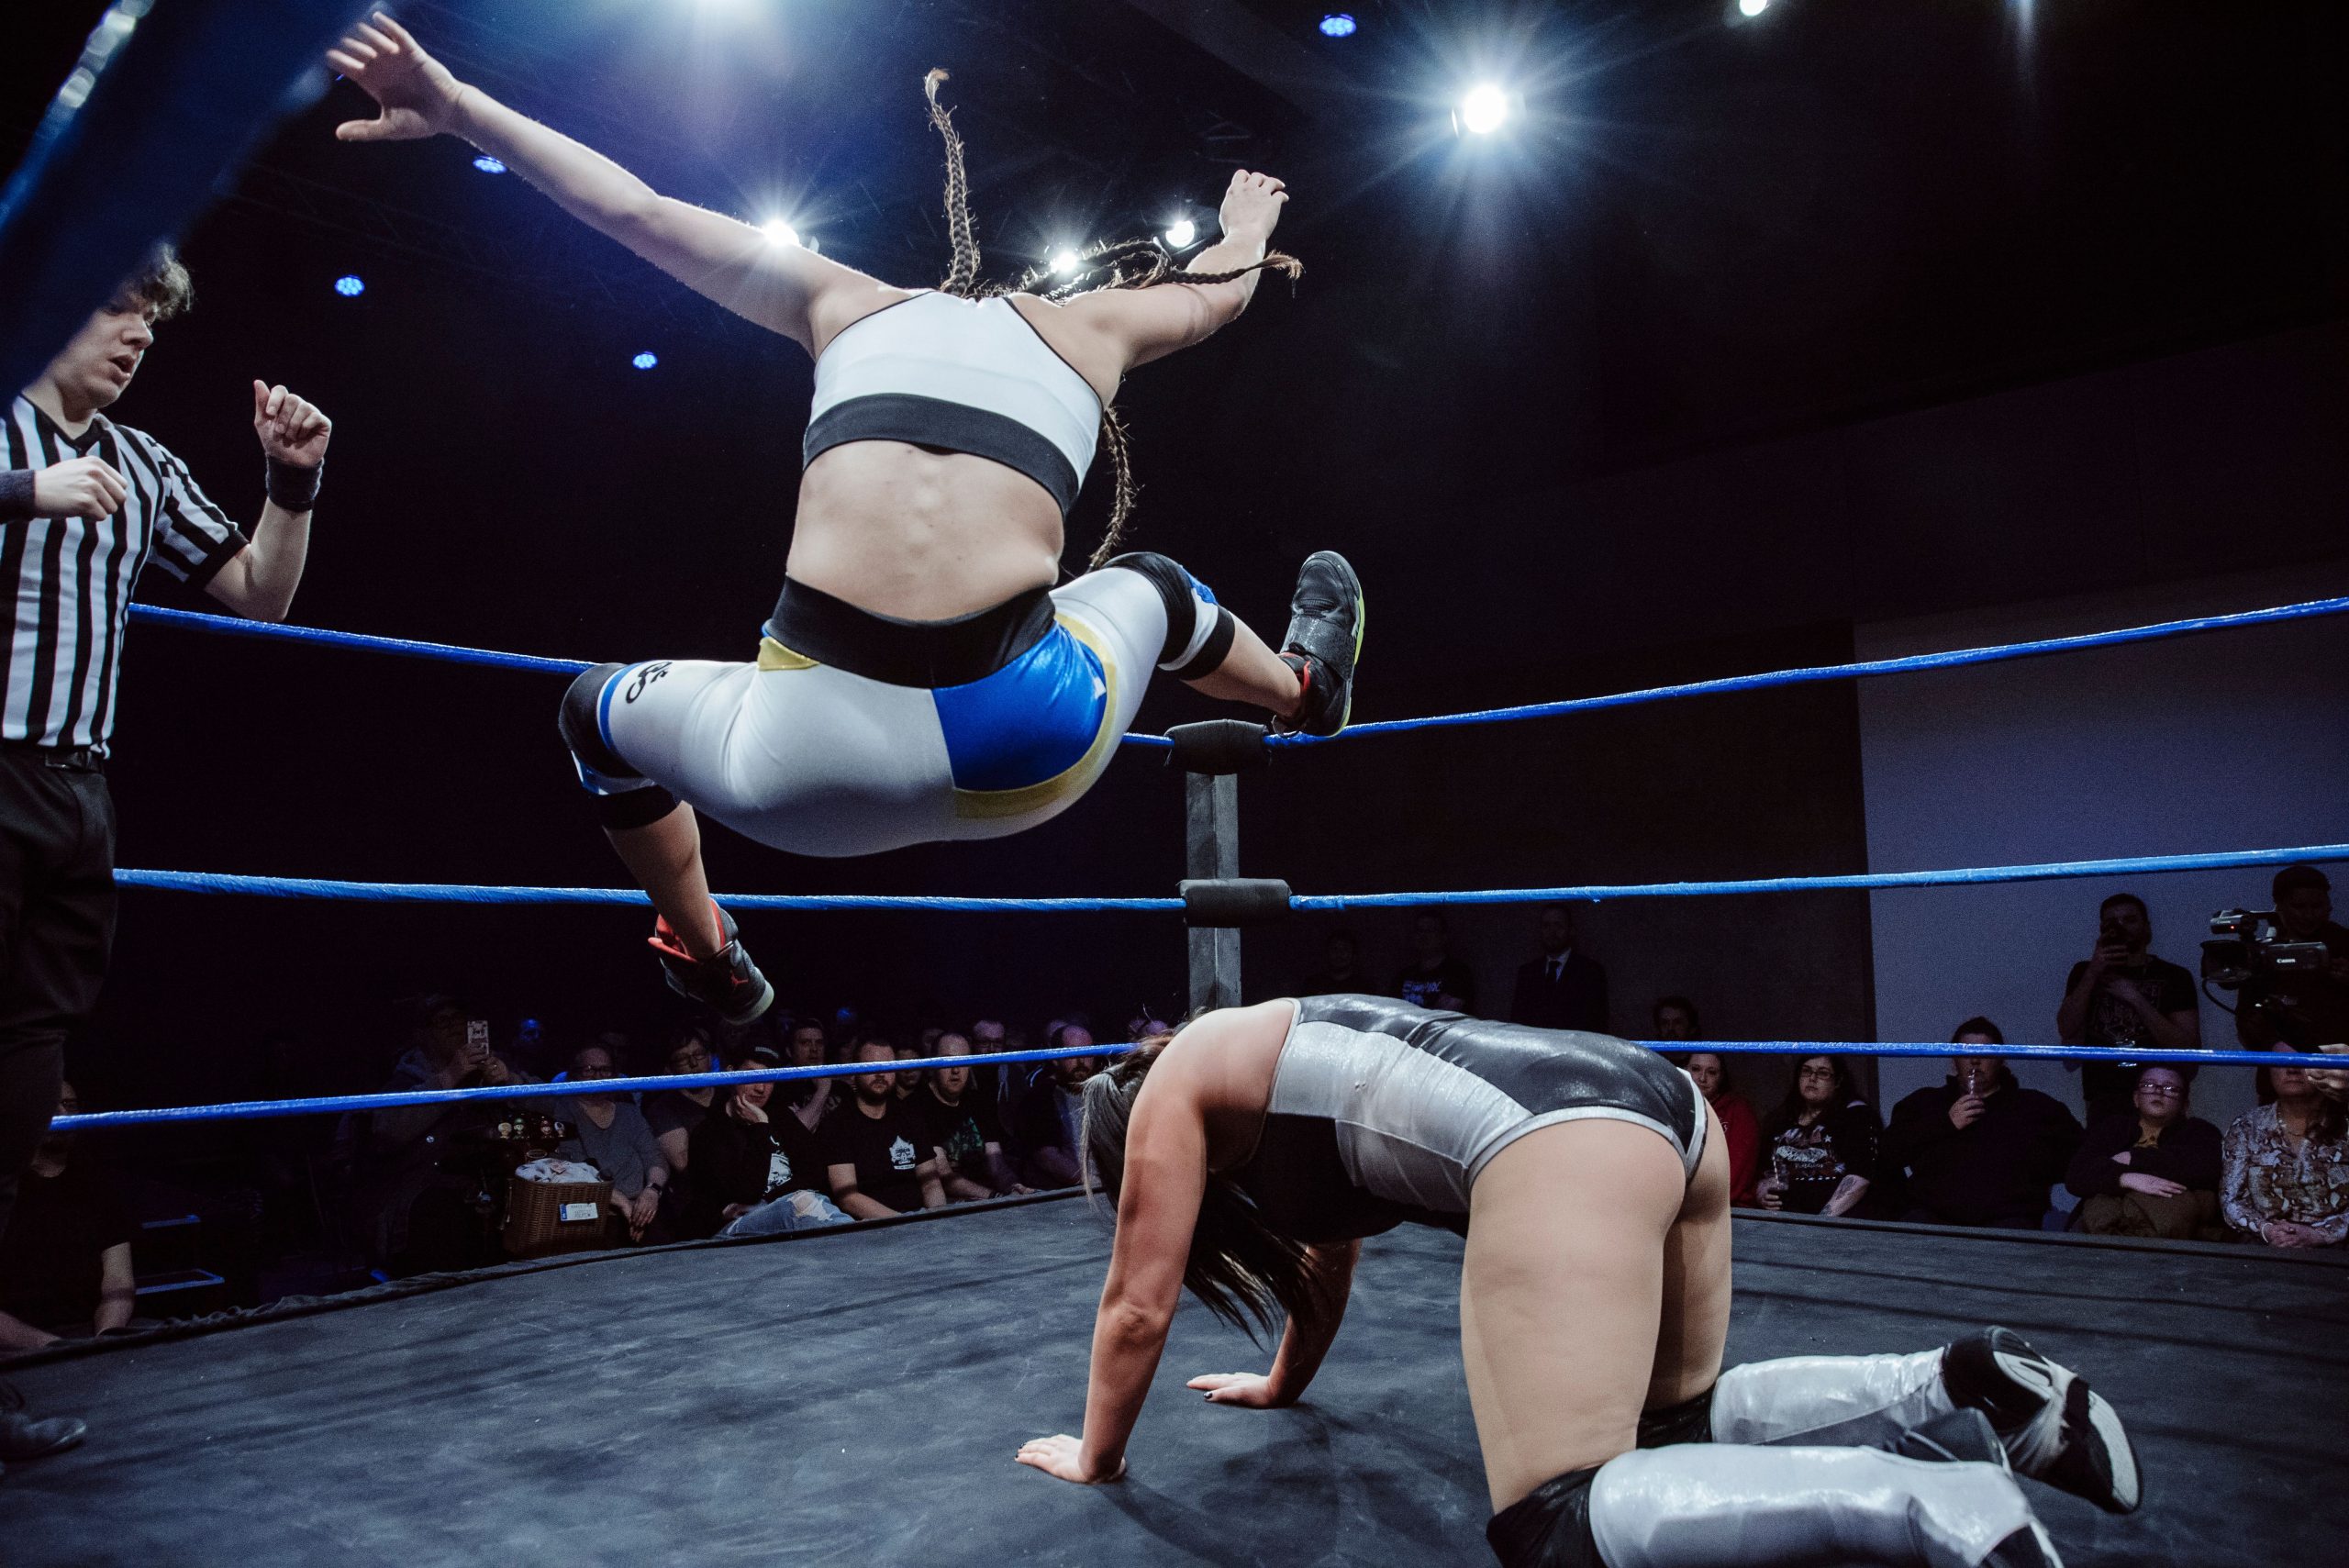 Parliamentary Debate on ‘Professional Wrestling: Event Licensing and Guidance’